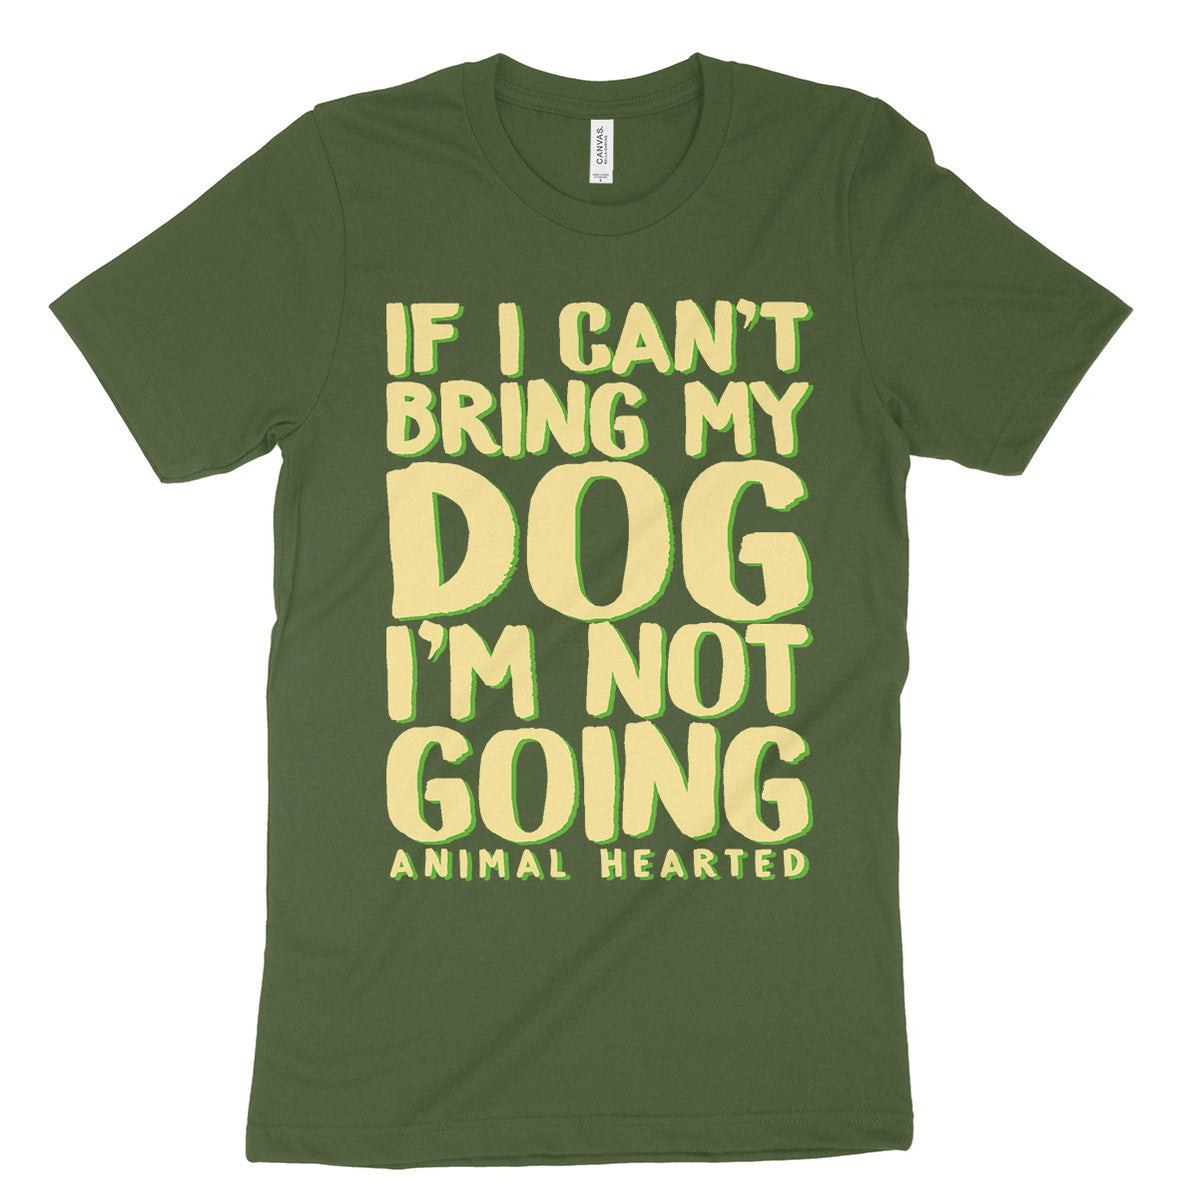 Dog Shirts for Humans | Animal Hearted Apparel